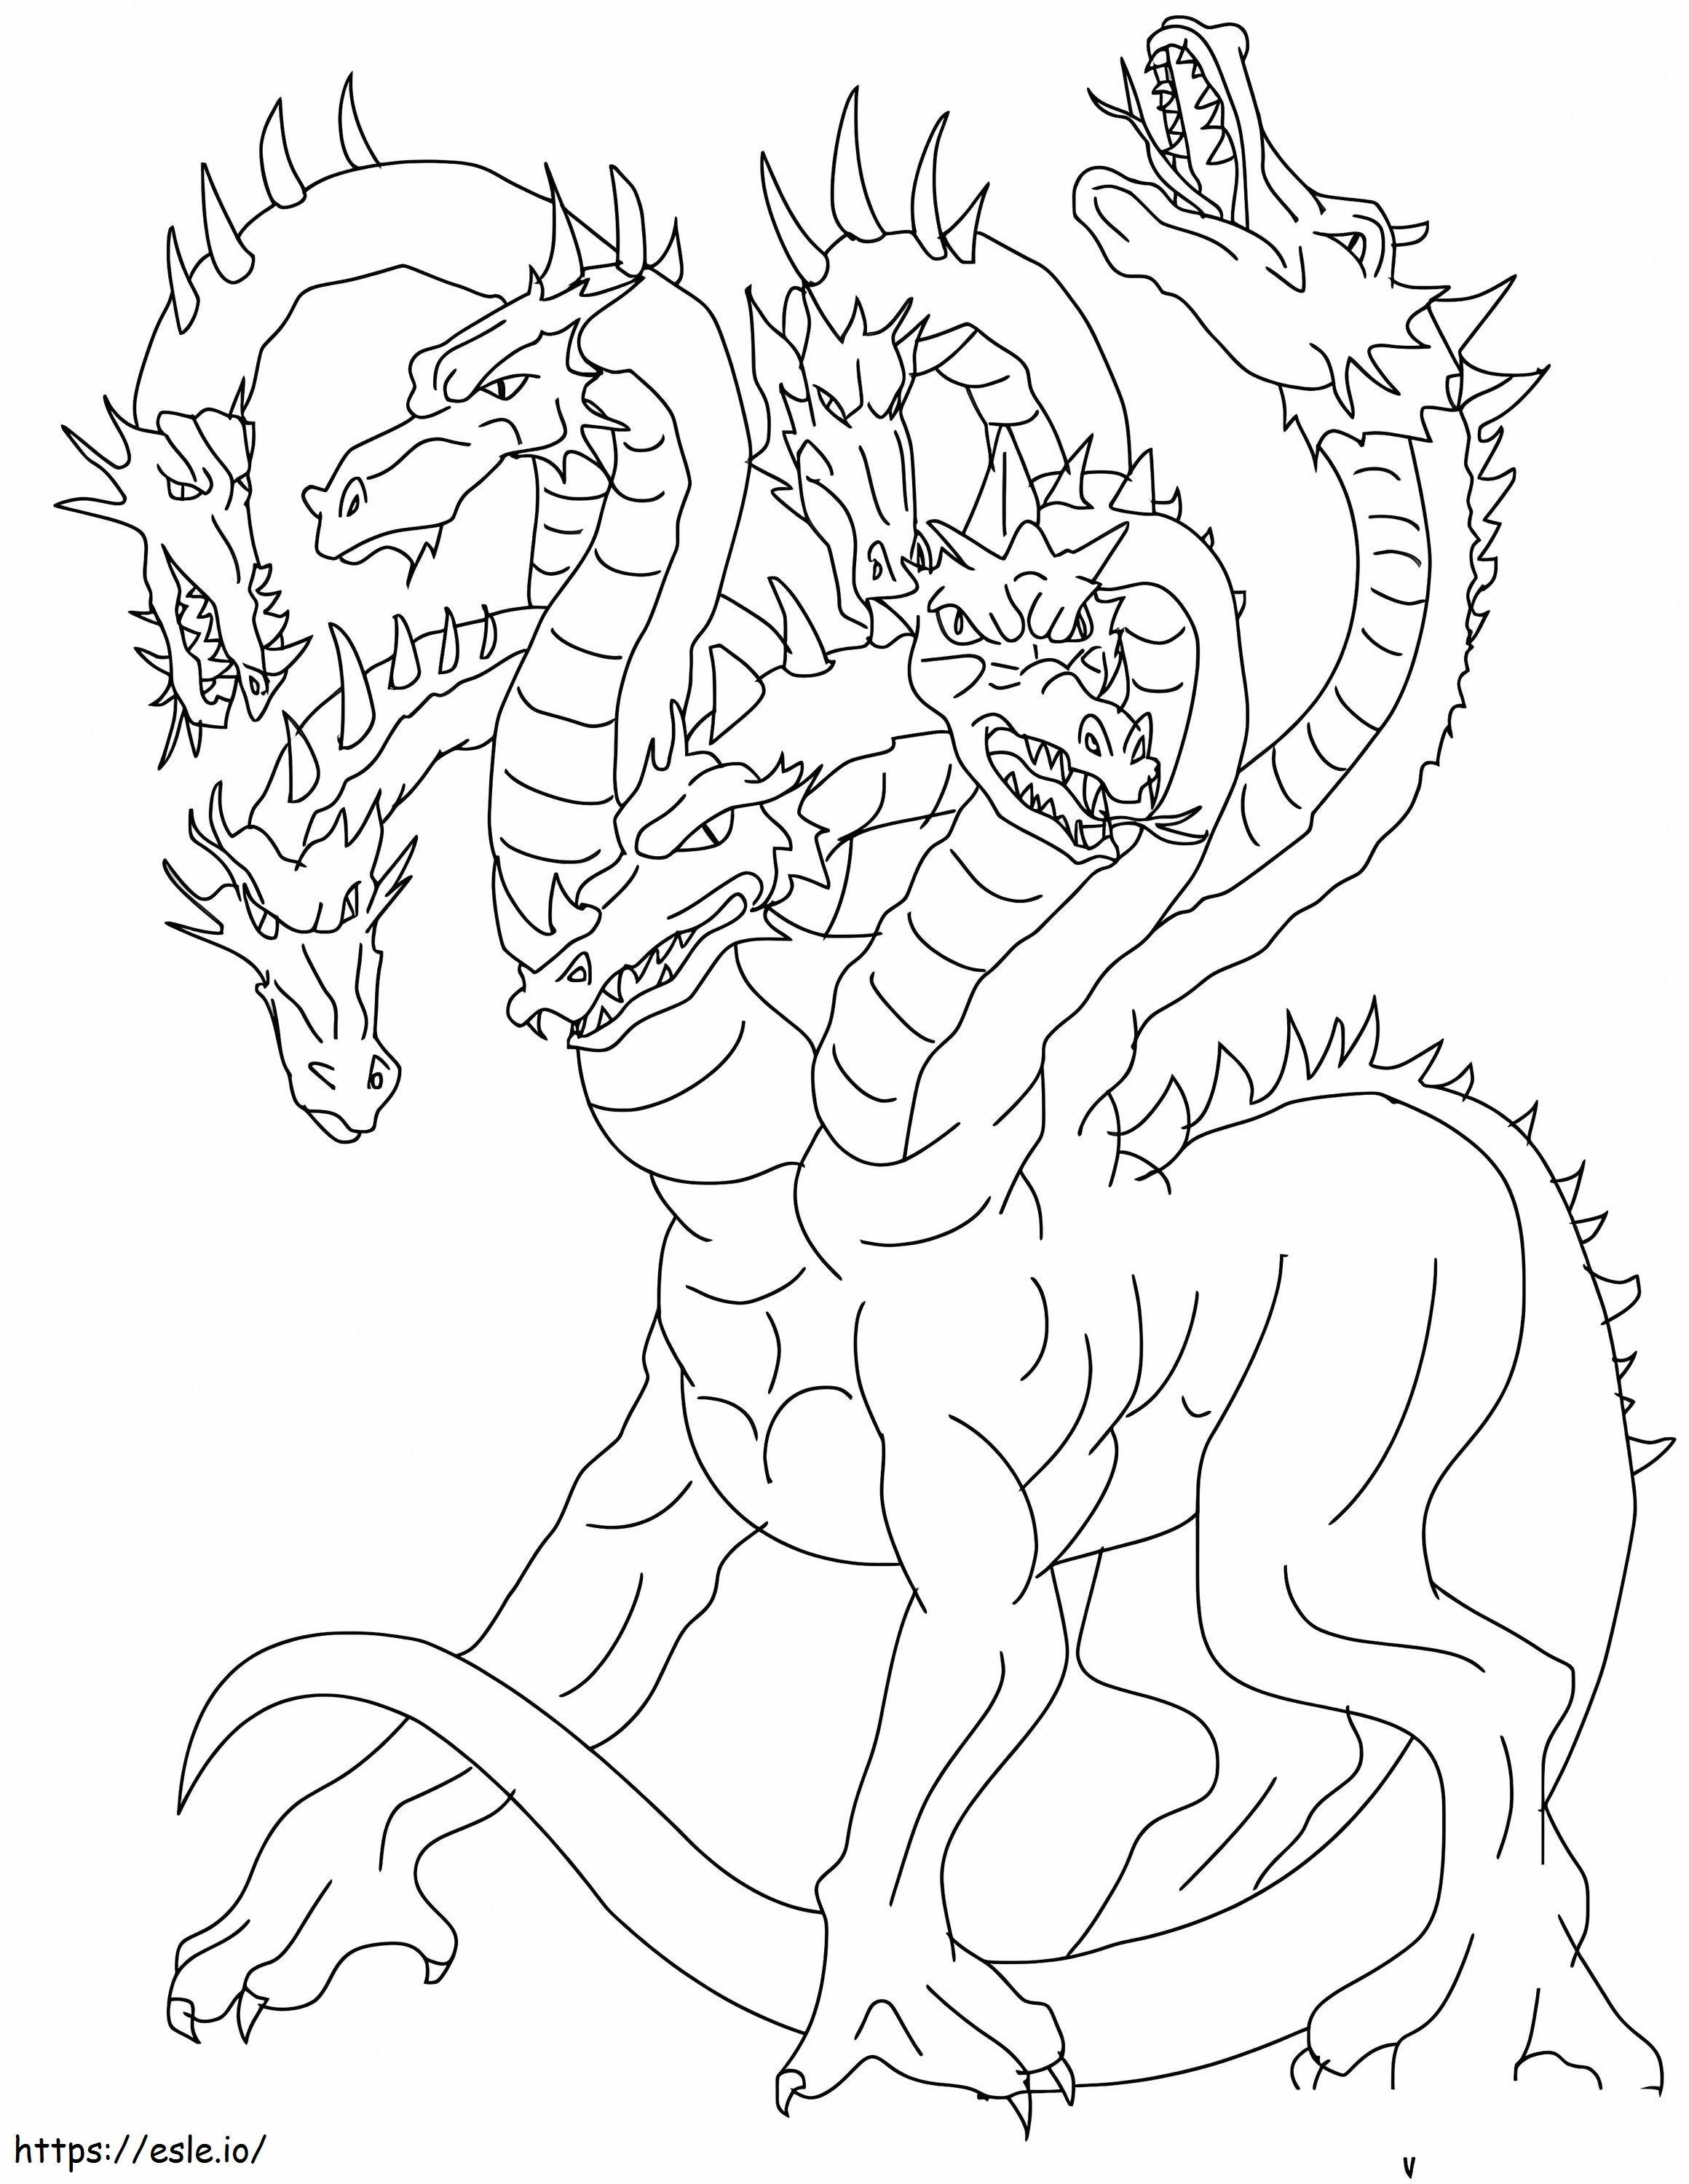 Chinese Dragon 5 coloring page